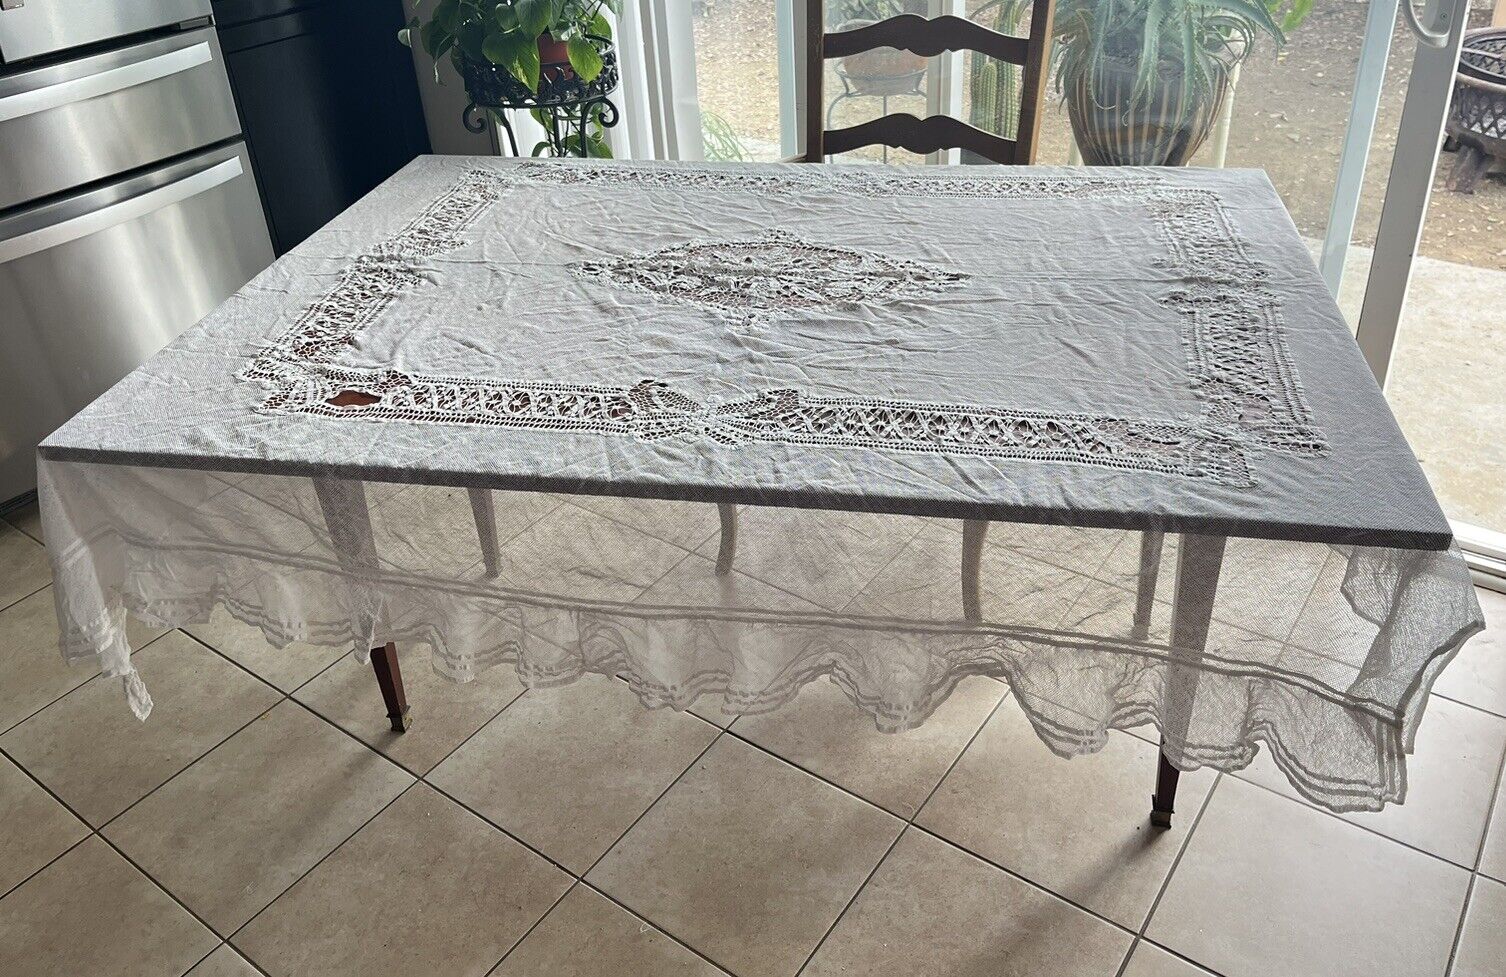 Antique French Lace Victorian Tablecloth Ivory Stunning 76 X 64”